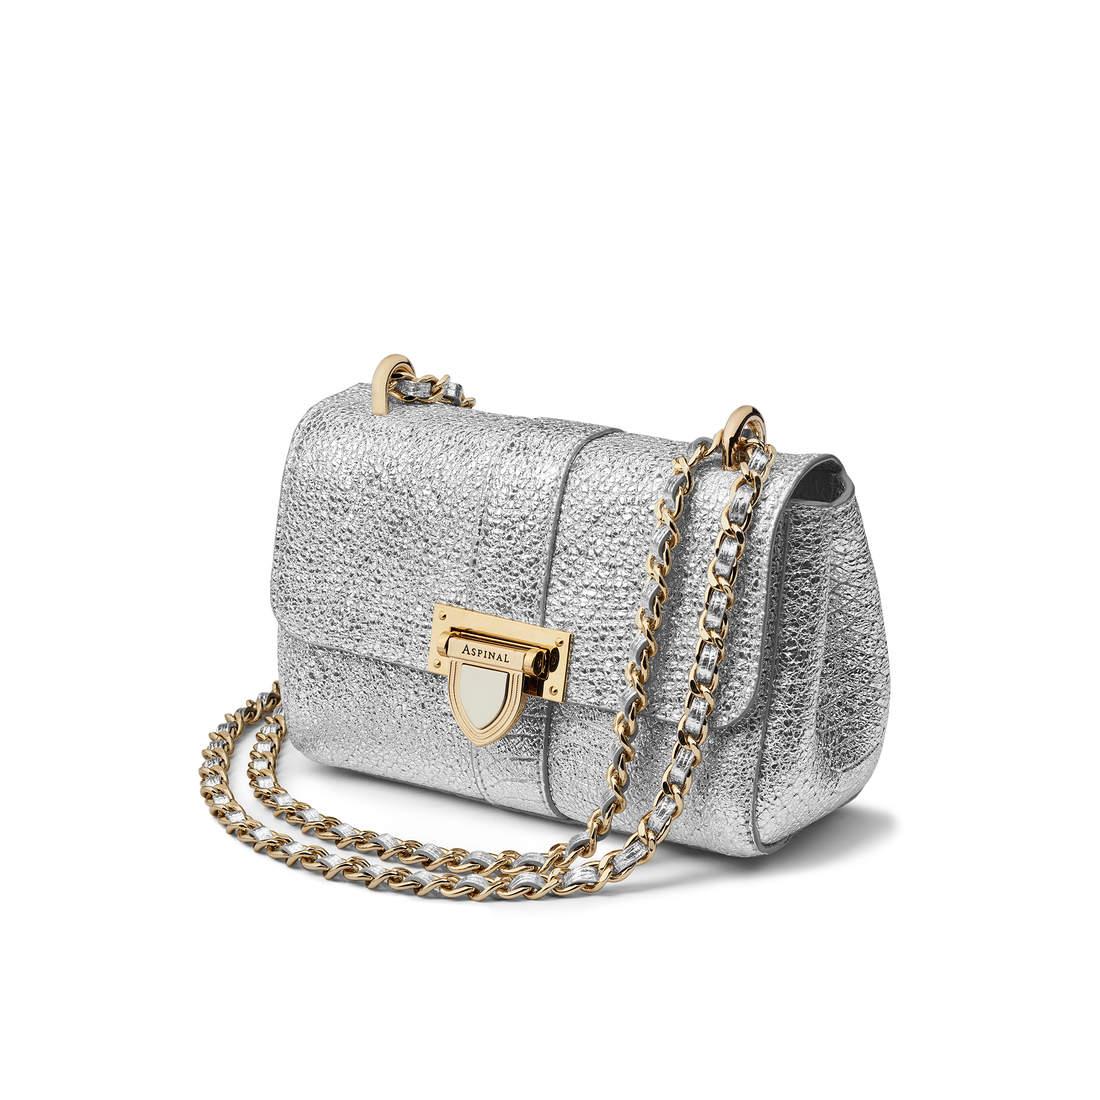 Aspinal of London Leather Micro Lottie Bag in Silver (Metallic) - Lyst